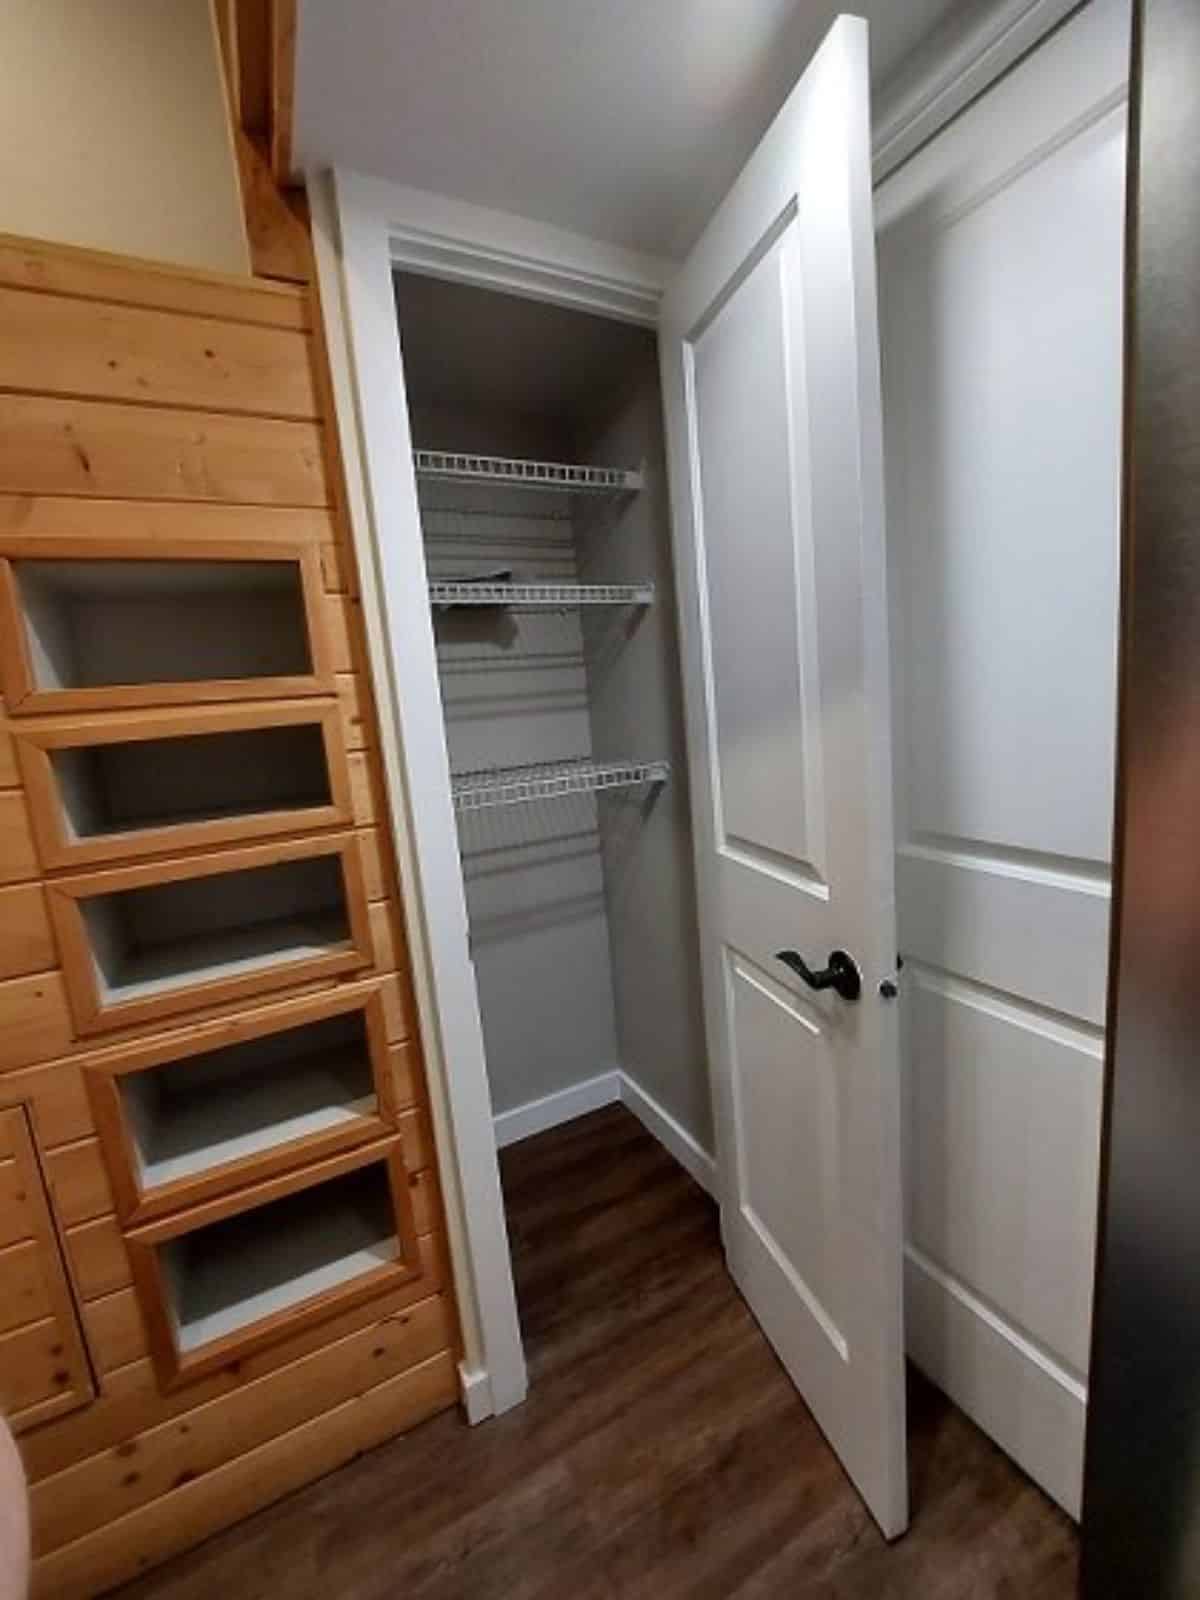 Storage cabinets to keep all the kitchen items